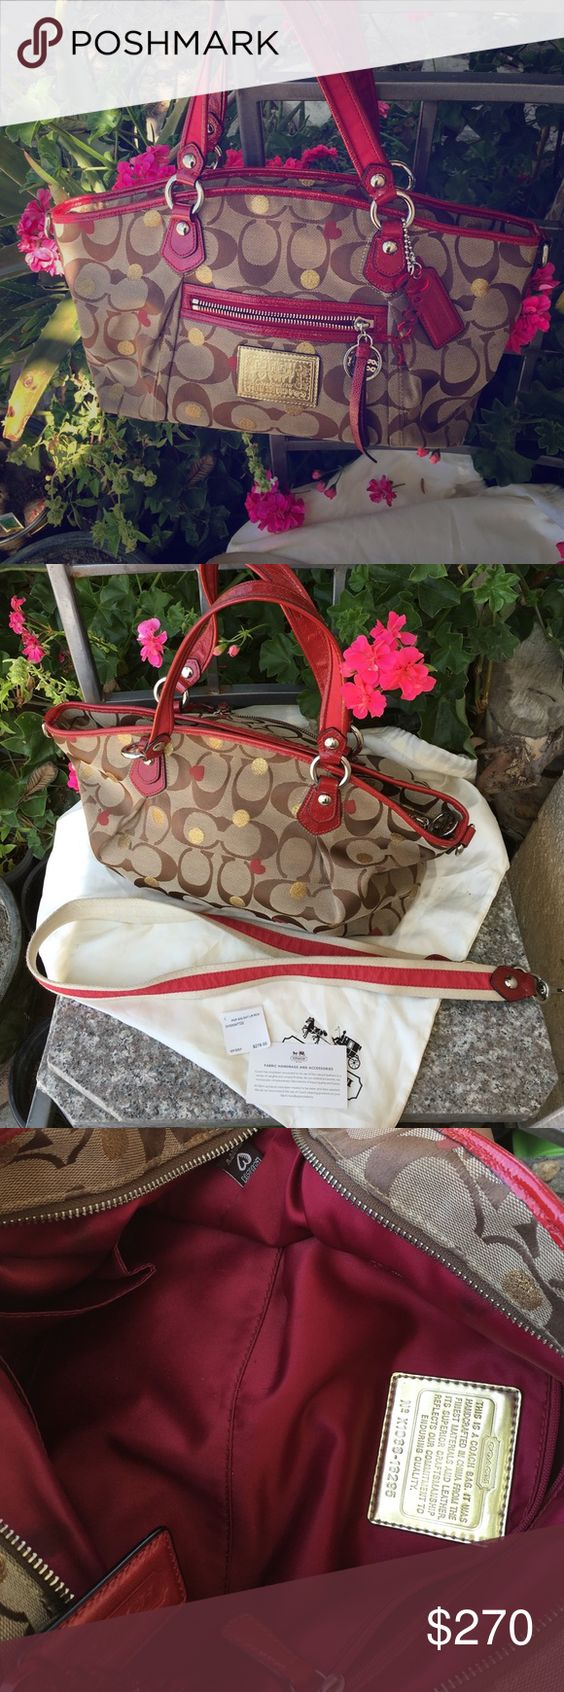 Poppy Secret Admirer Satchel Super cute and rare! Purchased on Valentine's four years ago! Like new! Used a couple of times! One small smudge on the inside near cell phone pocket! Comes with dust bad and retail tags. Also the adjustable side straps! Coach Bags Crossbody Bags